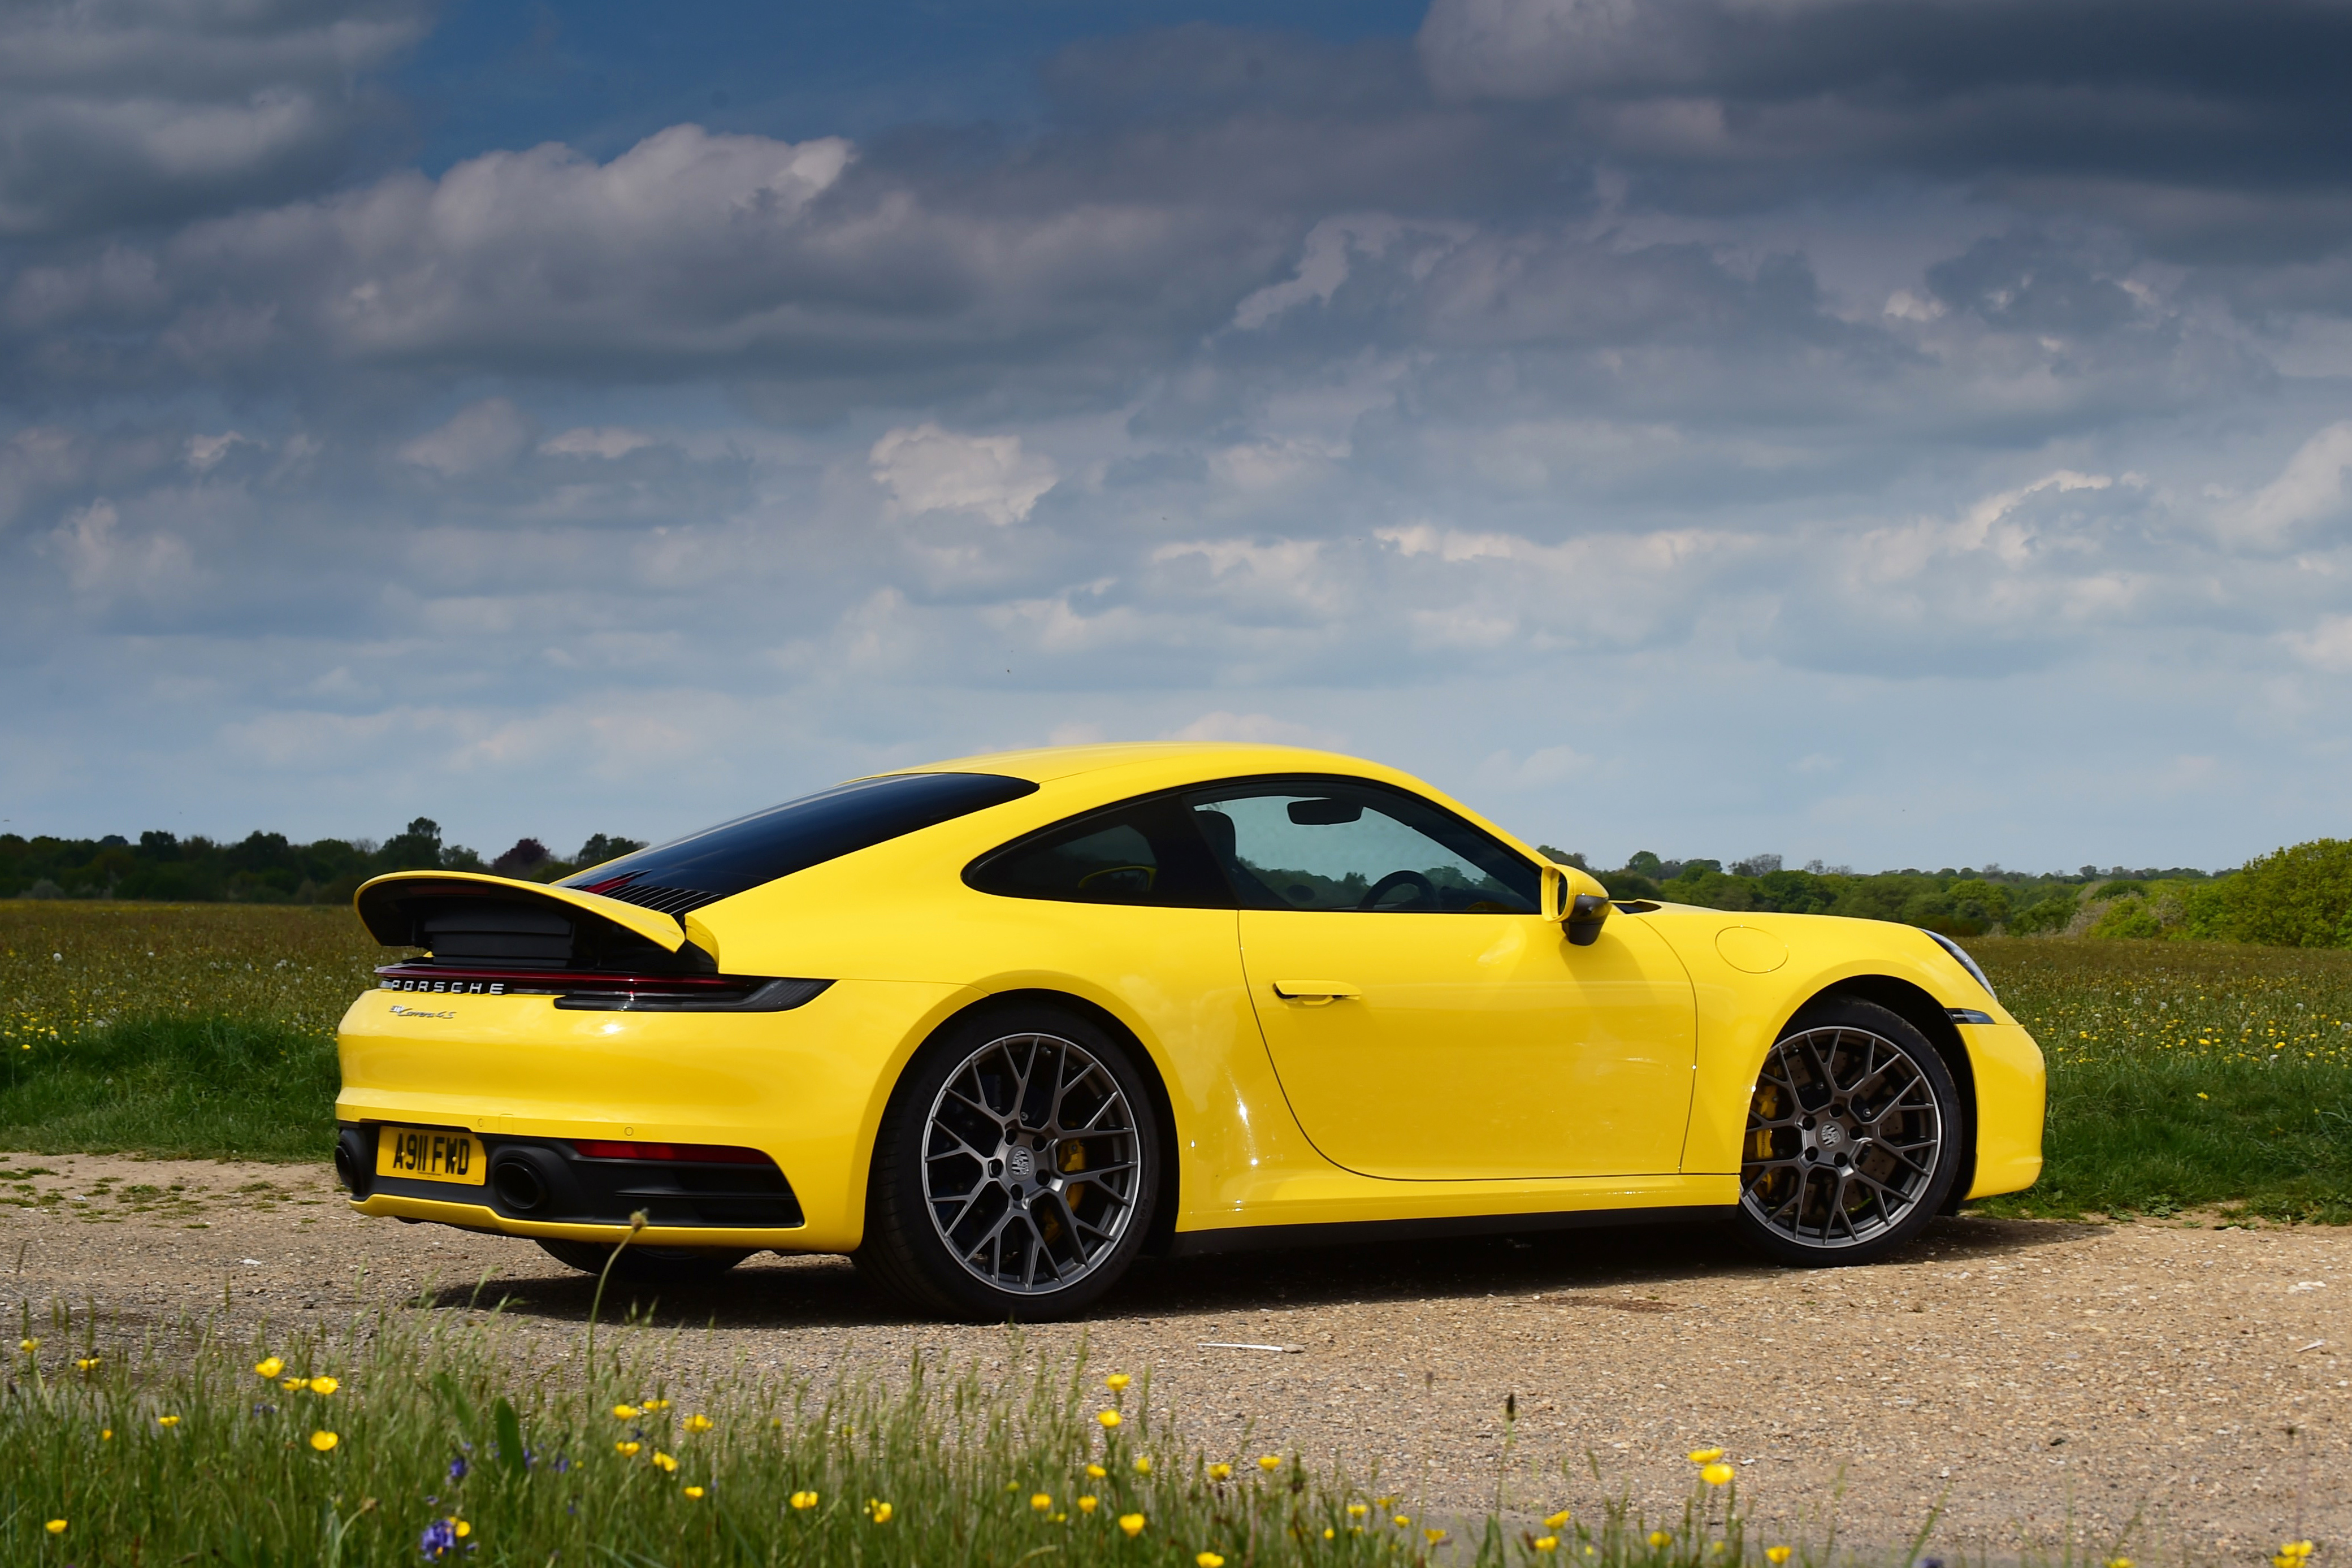 A yellow Porsche 911 with gray rims stands on a dirt road